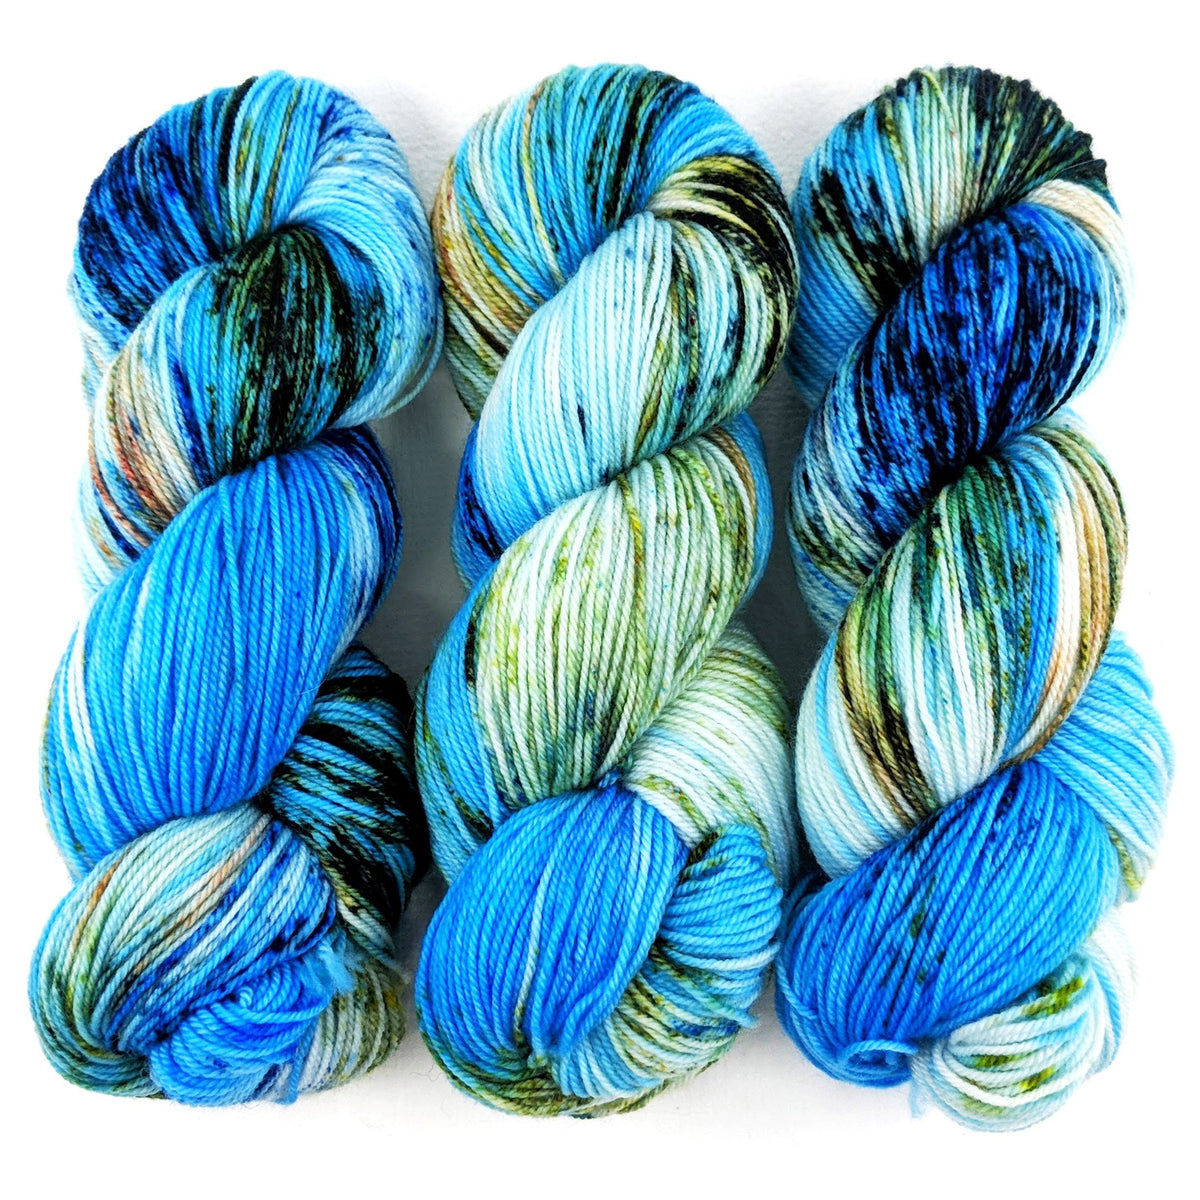 Degas - The Blue Dancers - Revival Worsted - Dyed Stock